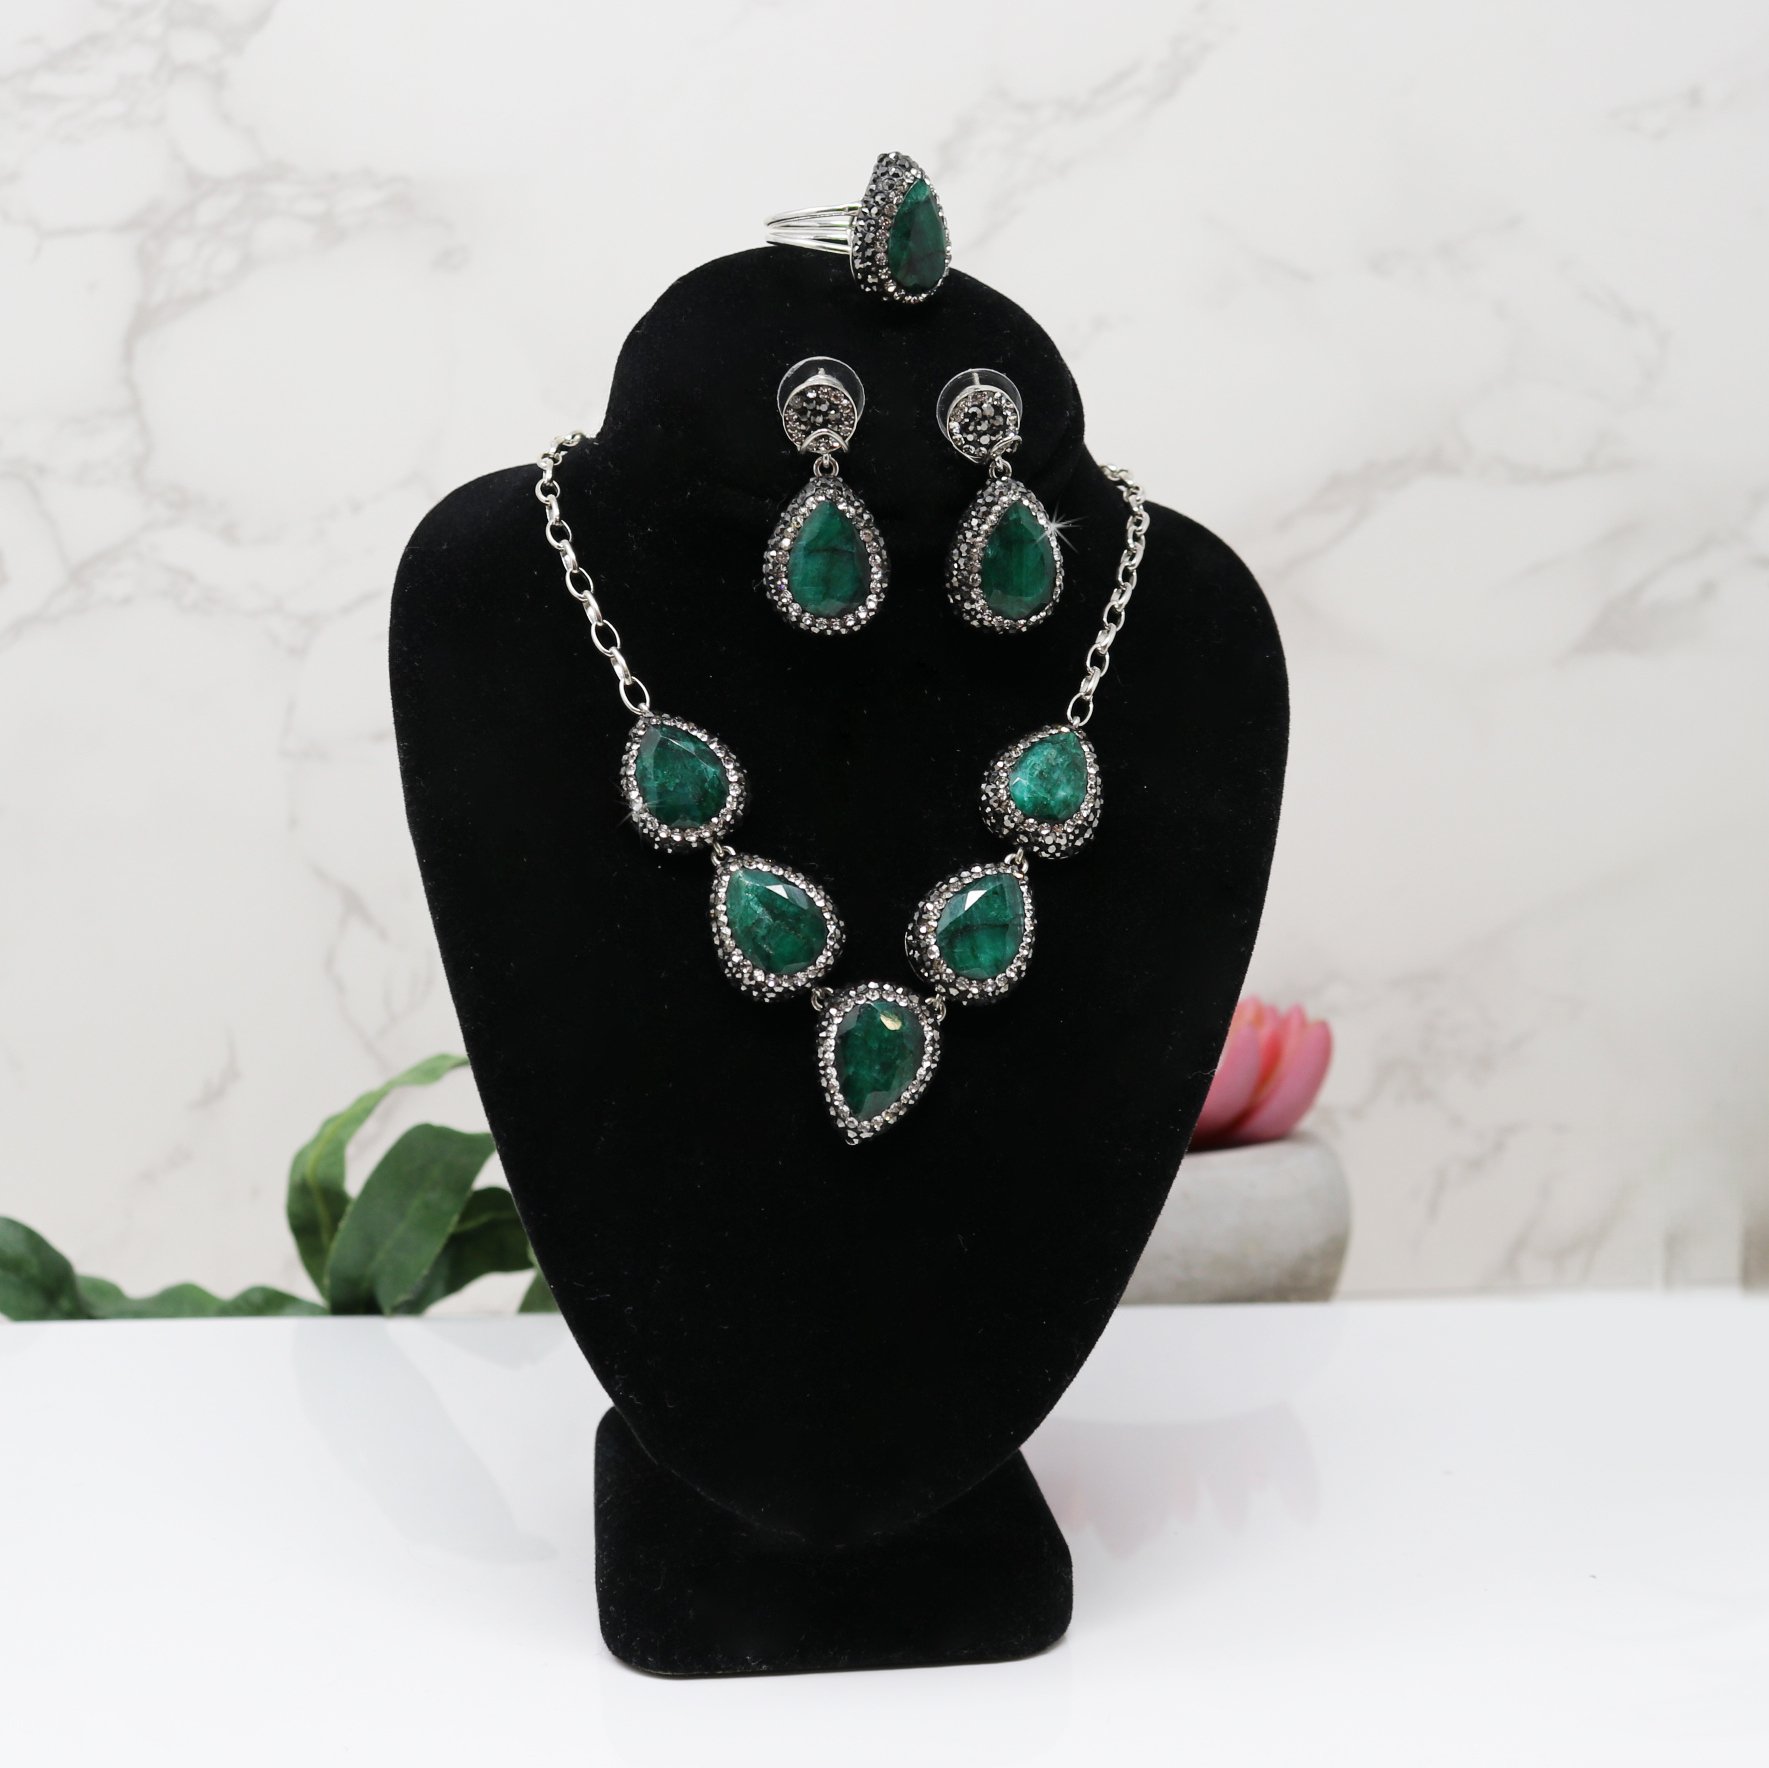 Emerald Set (Necklace; Earrings; Ring) 5 Simple Faceted Pears With Marcasite & Silver Crystals With Single Faceted Pear Earrings & Double Band Ring Szadj